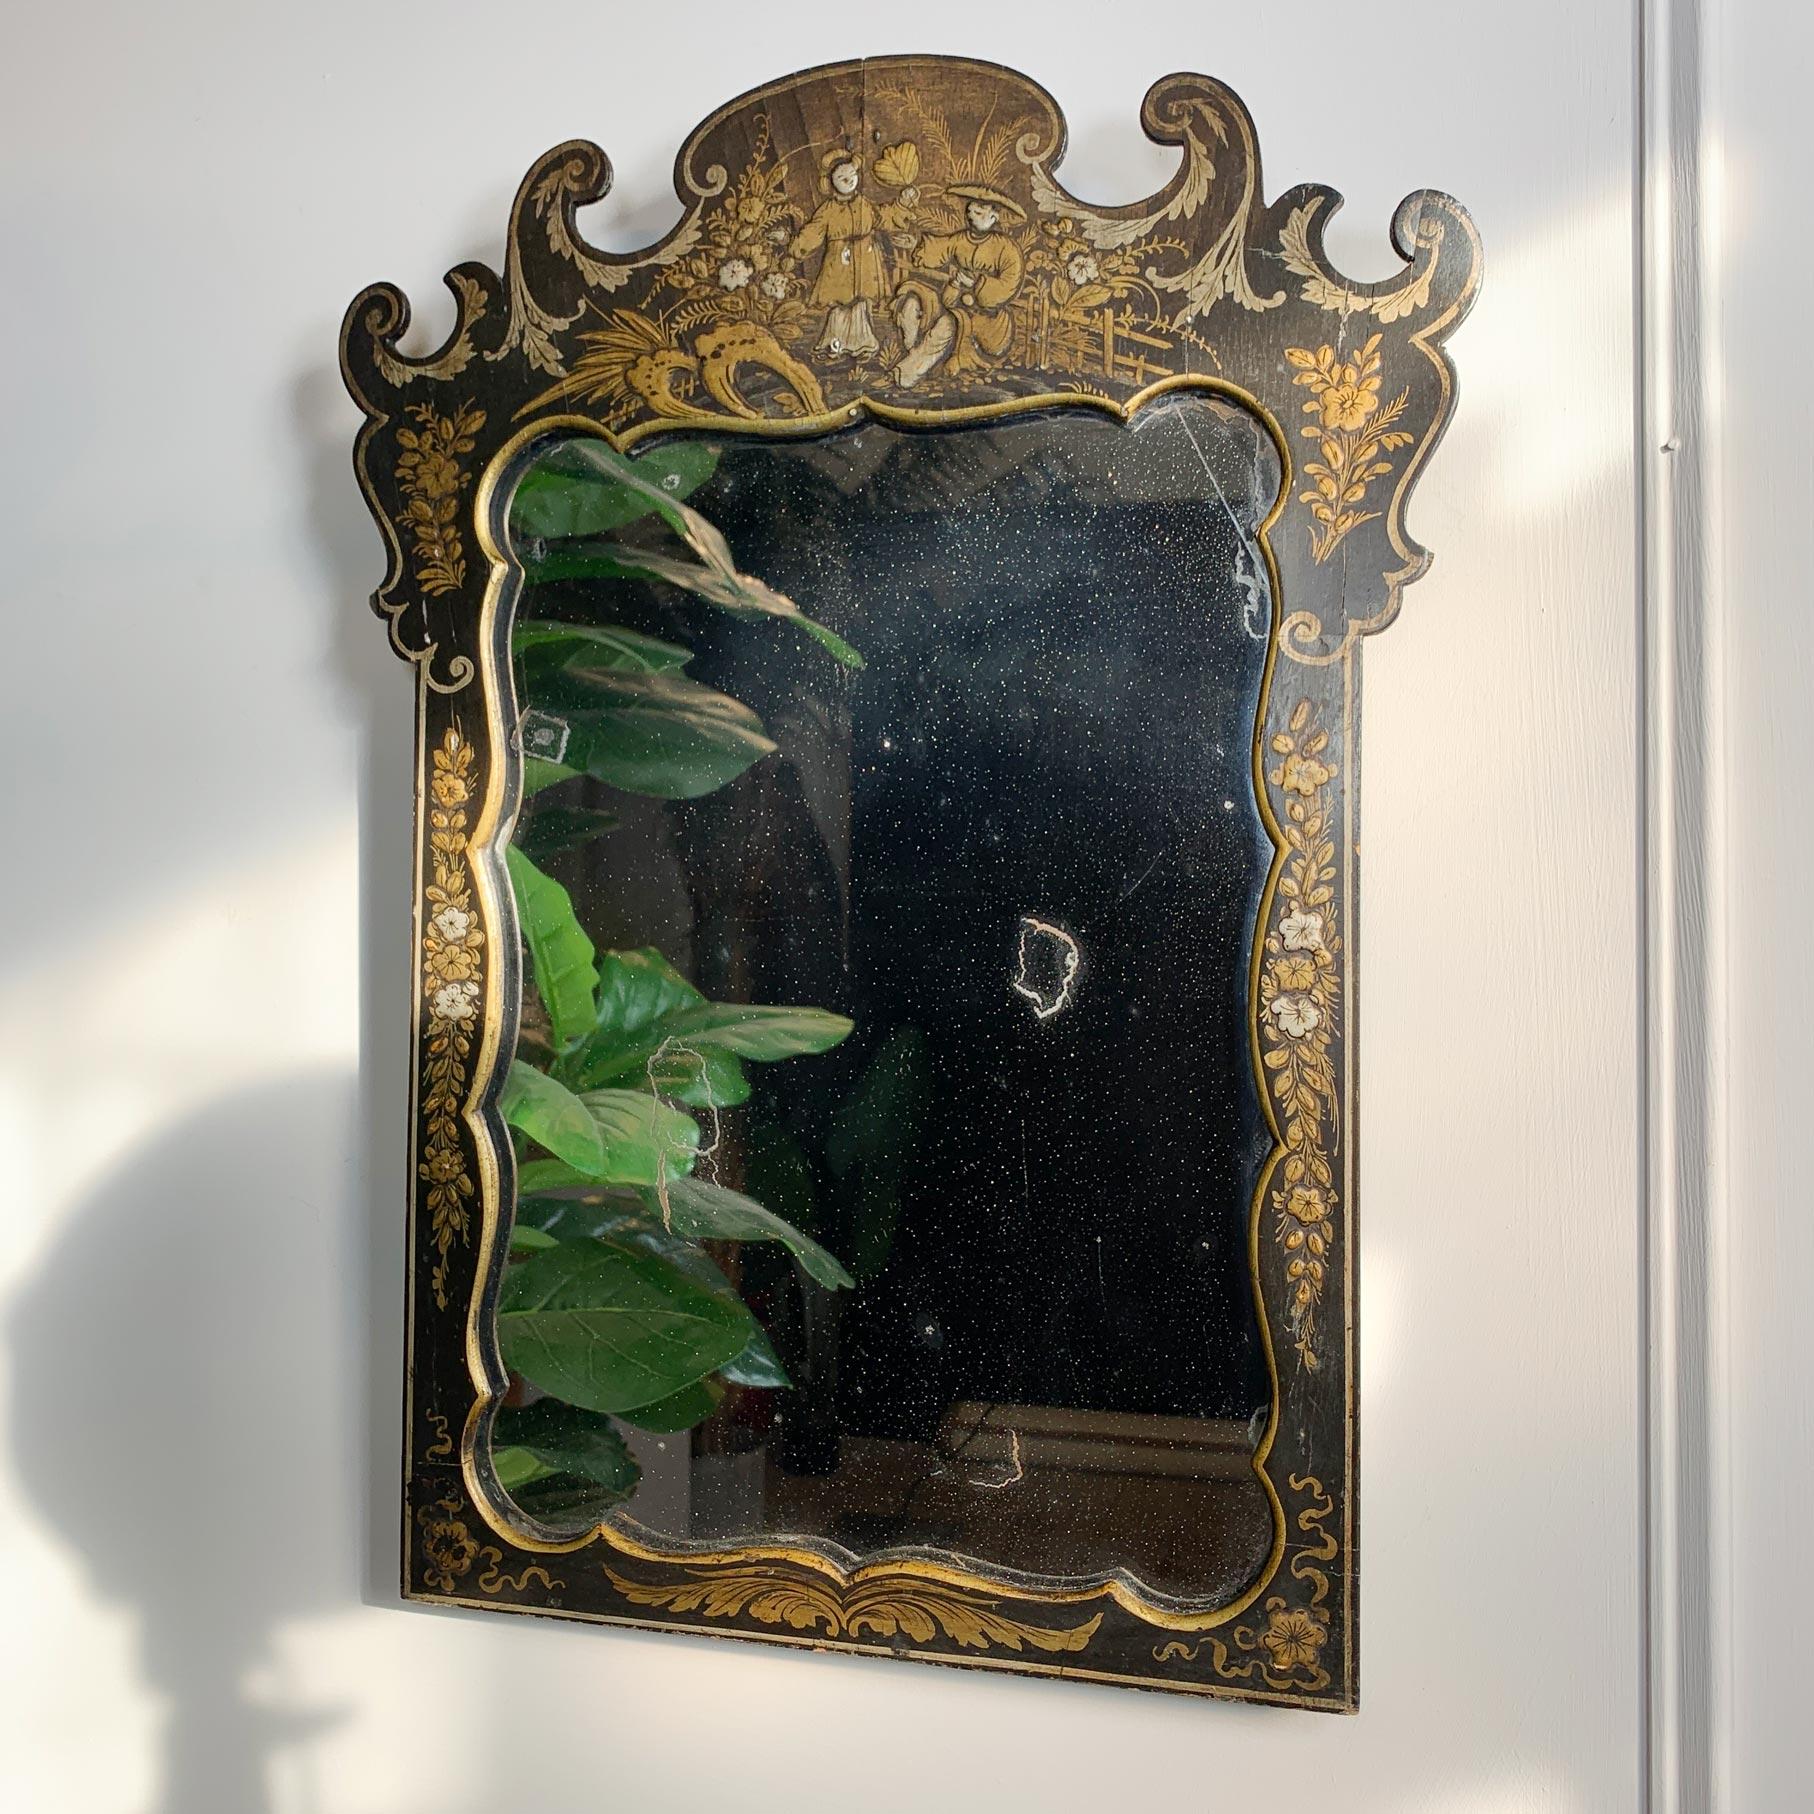 Stunning 19th century Napoleon III French black lacquered Chinoiserie mirror, acquired from the estate of descendants of Jules Verne’s family, the Salomon-Mortello family, following the sale of their property (Hôtel Particulier) Boulevard Camus in